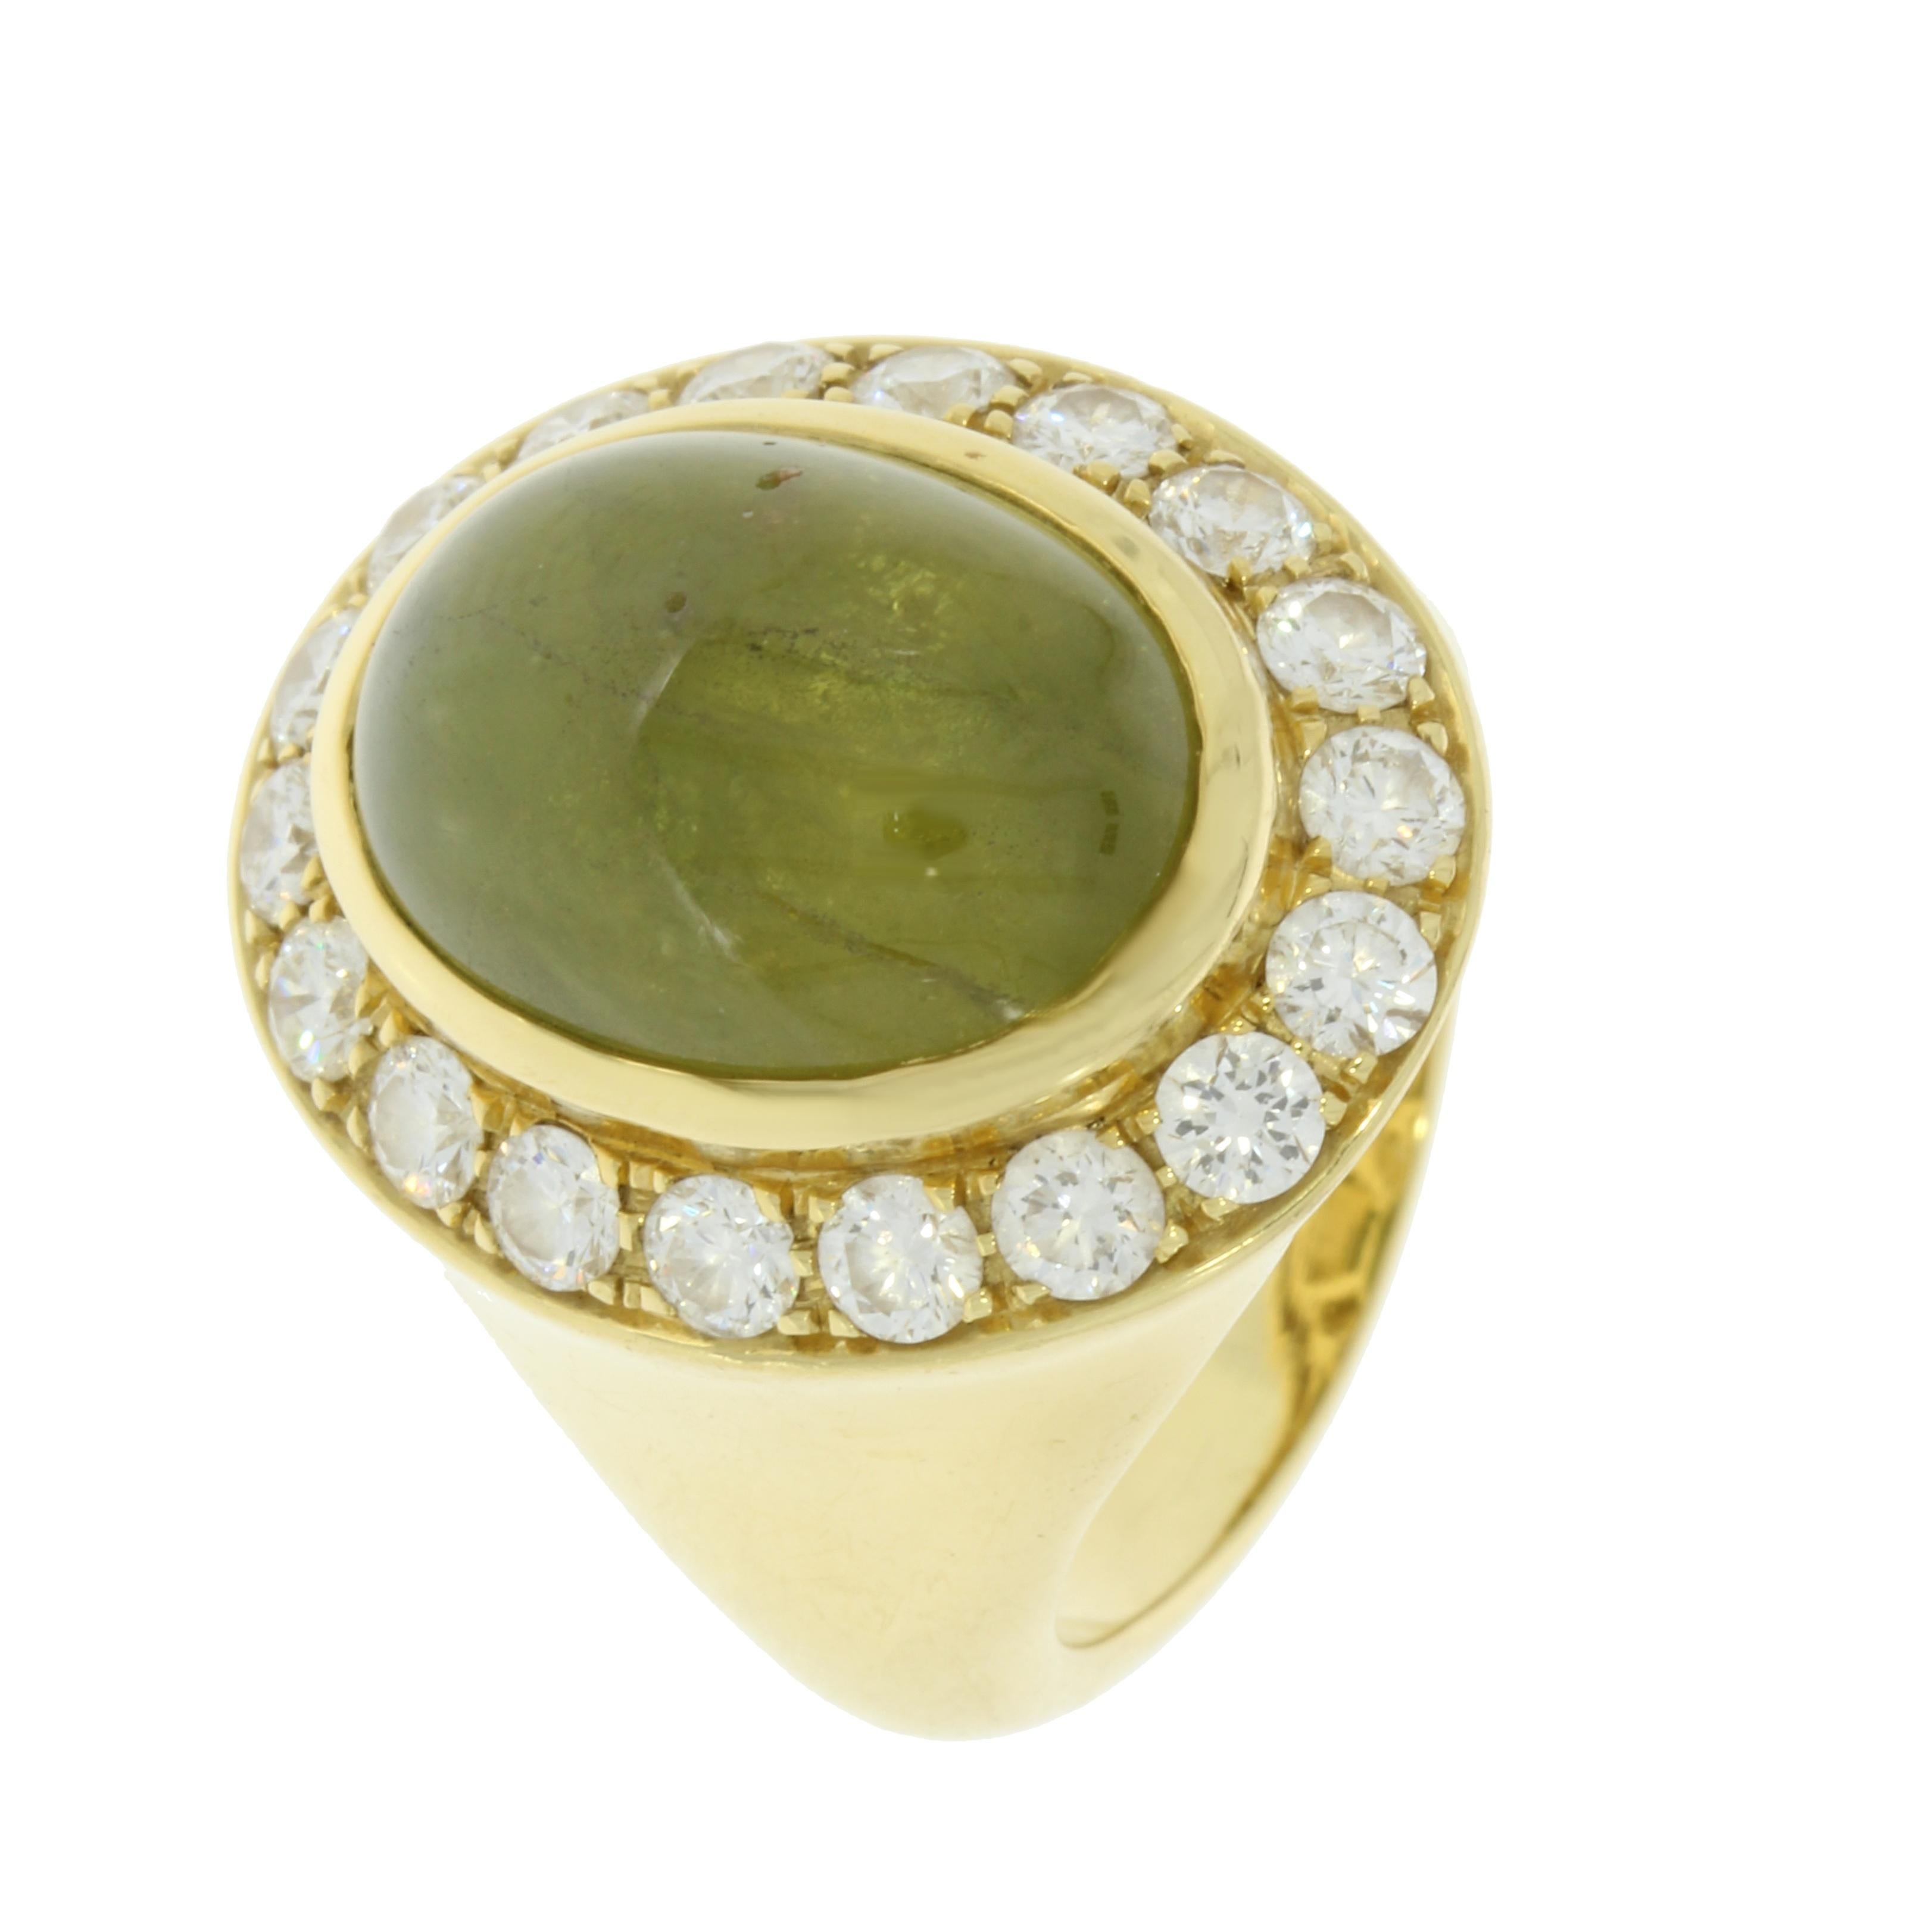 An exquisite oval cut natural green sapphire surrounded by a glistening halo of brilliant cut diamonds is set upon a smooth curvature that elegantly glides around the pinky finger.

Natural Green Sapphire Pinky Ring 
Details:
- 18 Karat Yellow